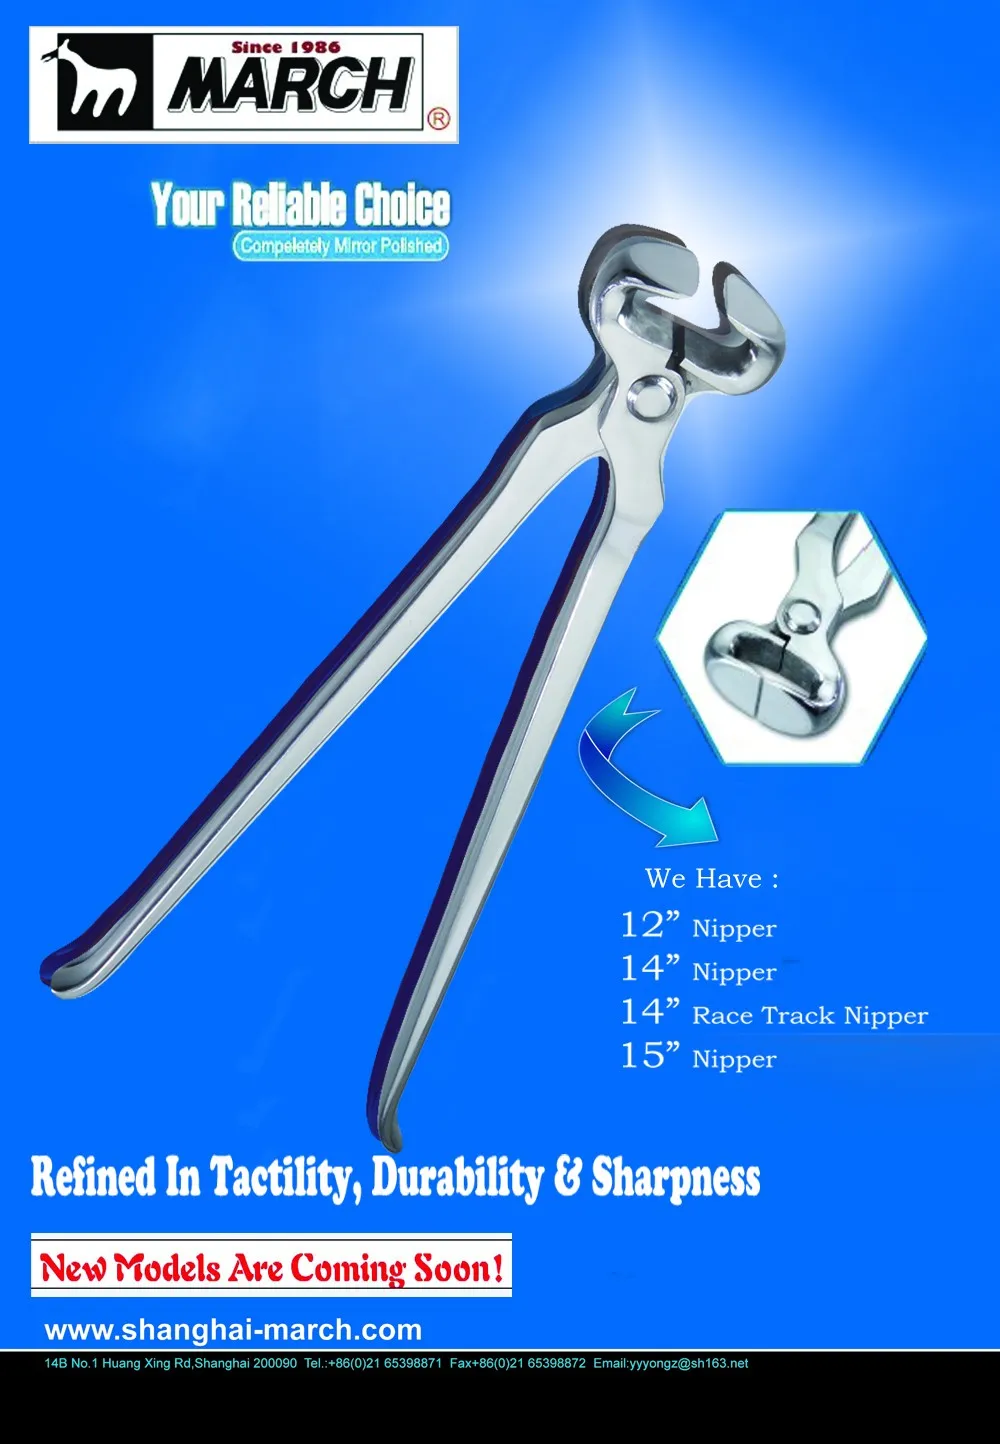 March Farrier tools high Quality factory price